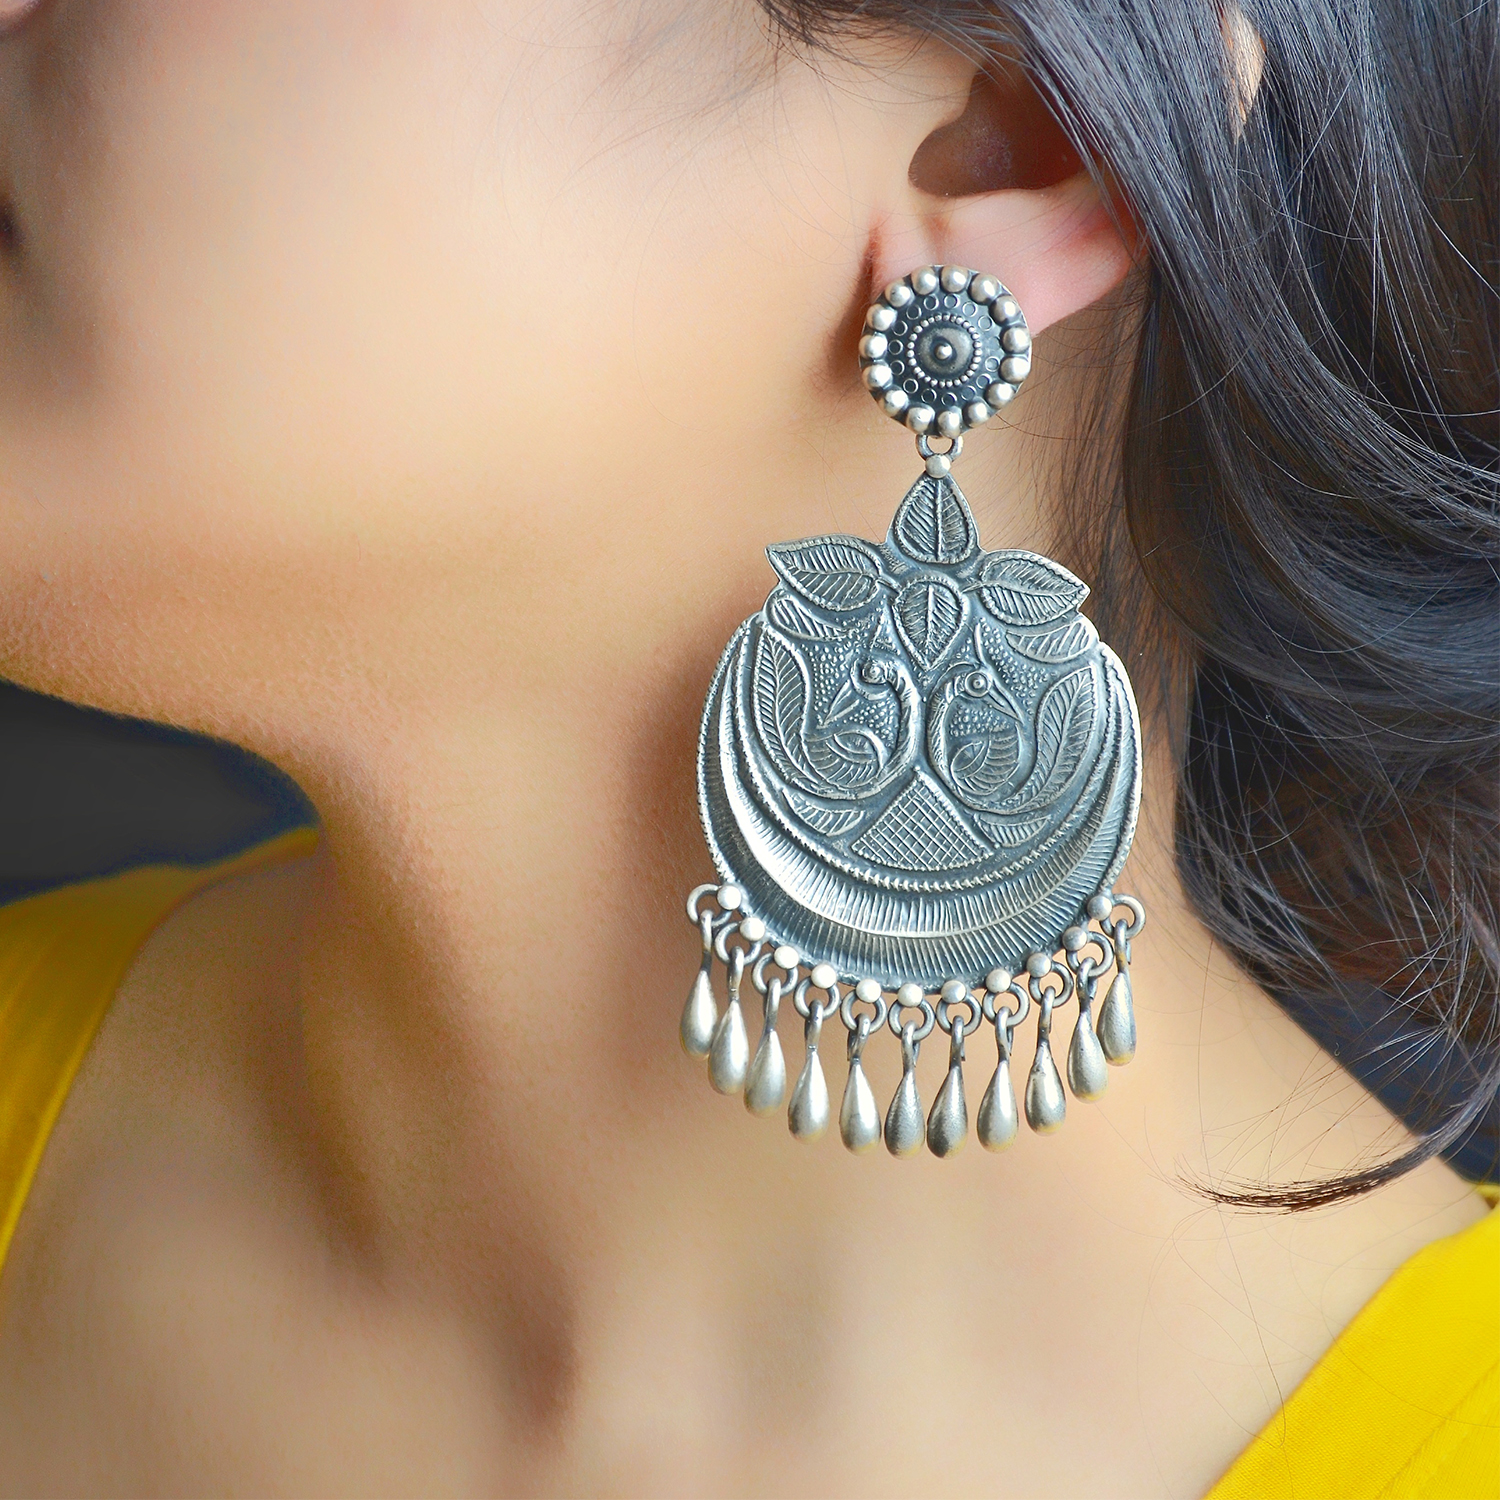 Check out the beautiful Jaya silver earrings for women